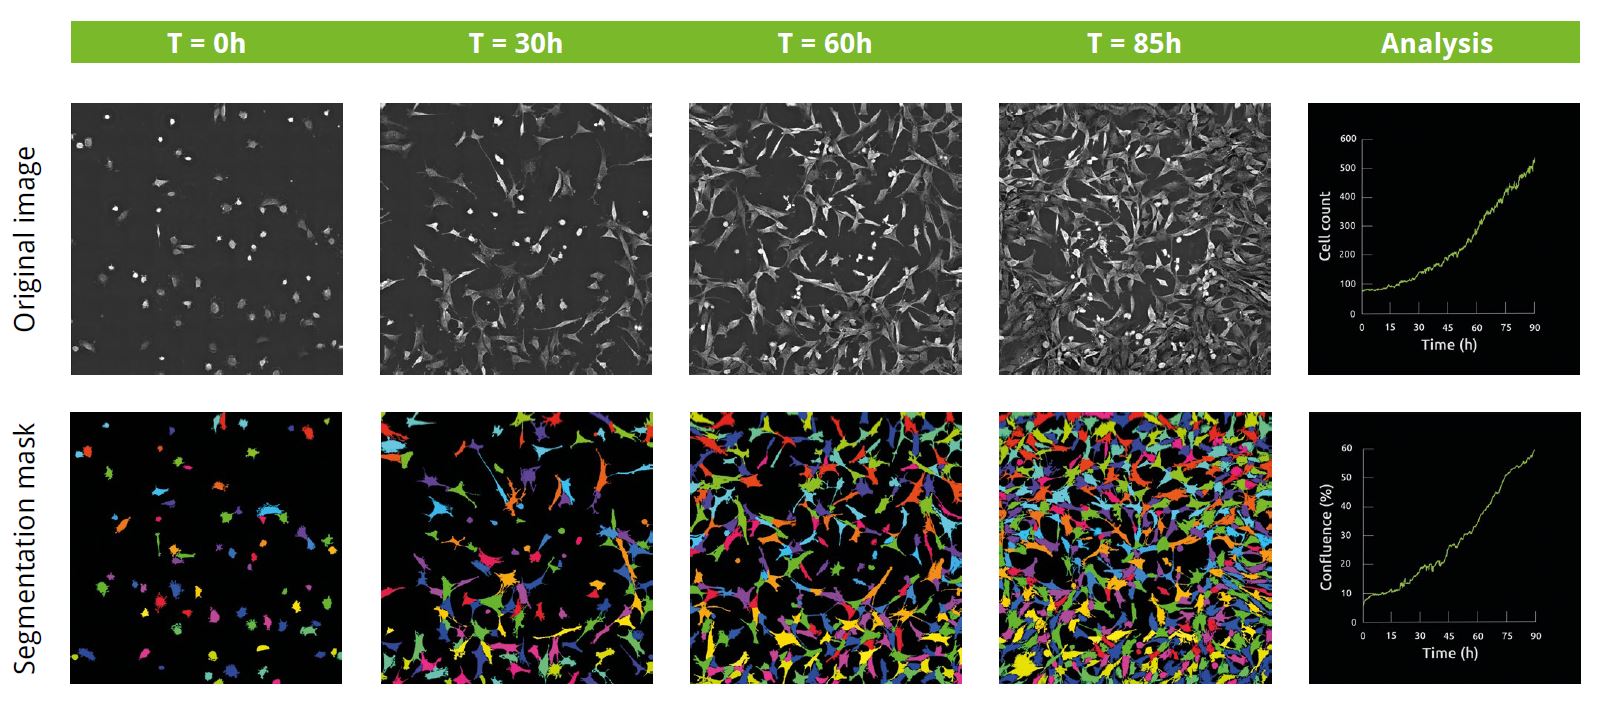 Image 1 - Unperturbed 3T3-derived pre-adipocyte cells label-free live cell imaging for 90h